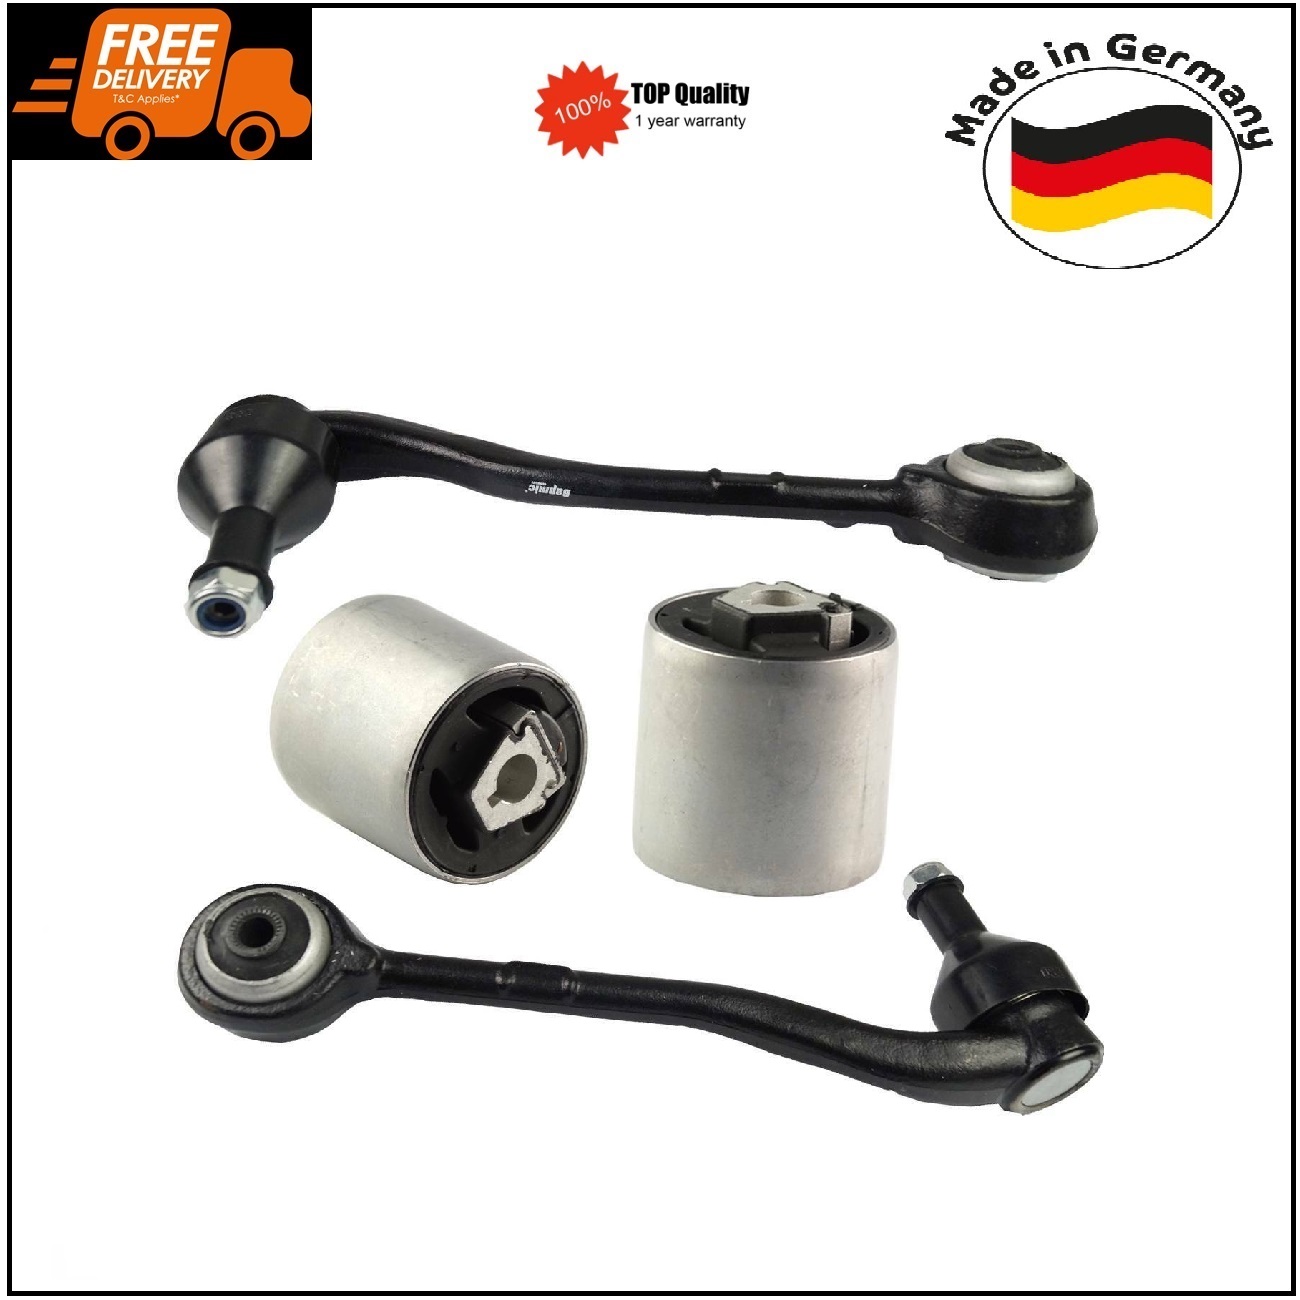 2 Front Control Arms + 2 Trailing Arm Bushings for 00-06 BMW E53 X5 3.0 German Made